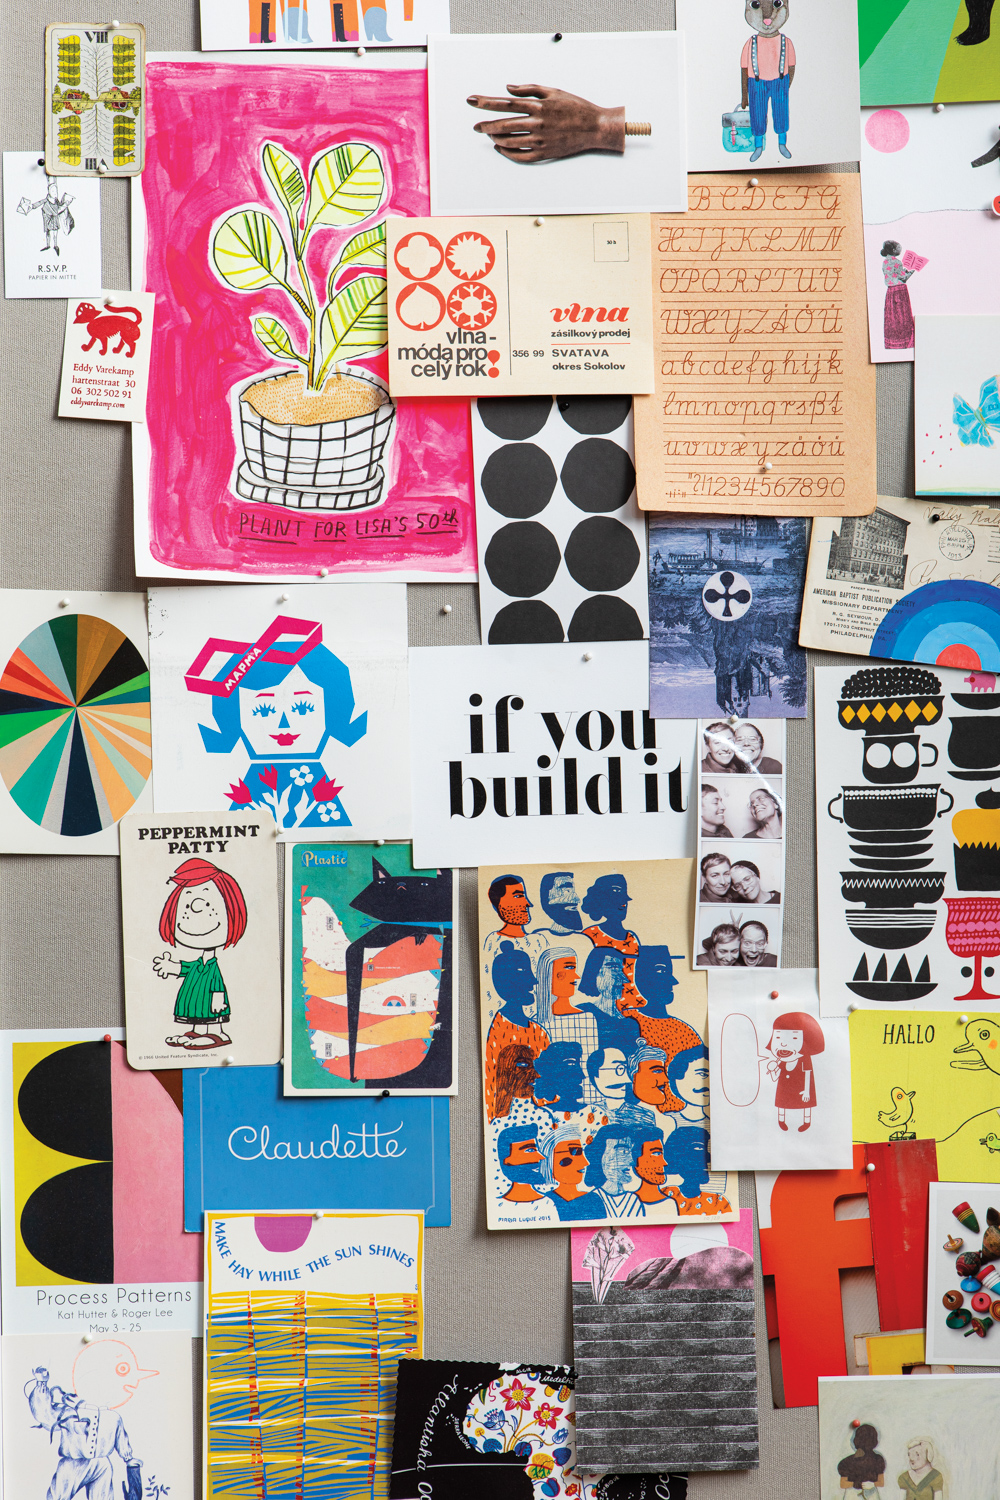 An inspiration board holds color pieces of paper.